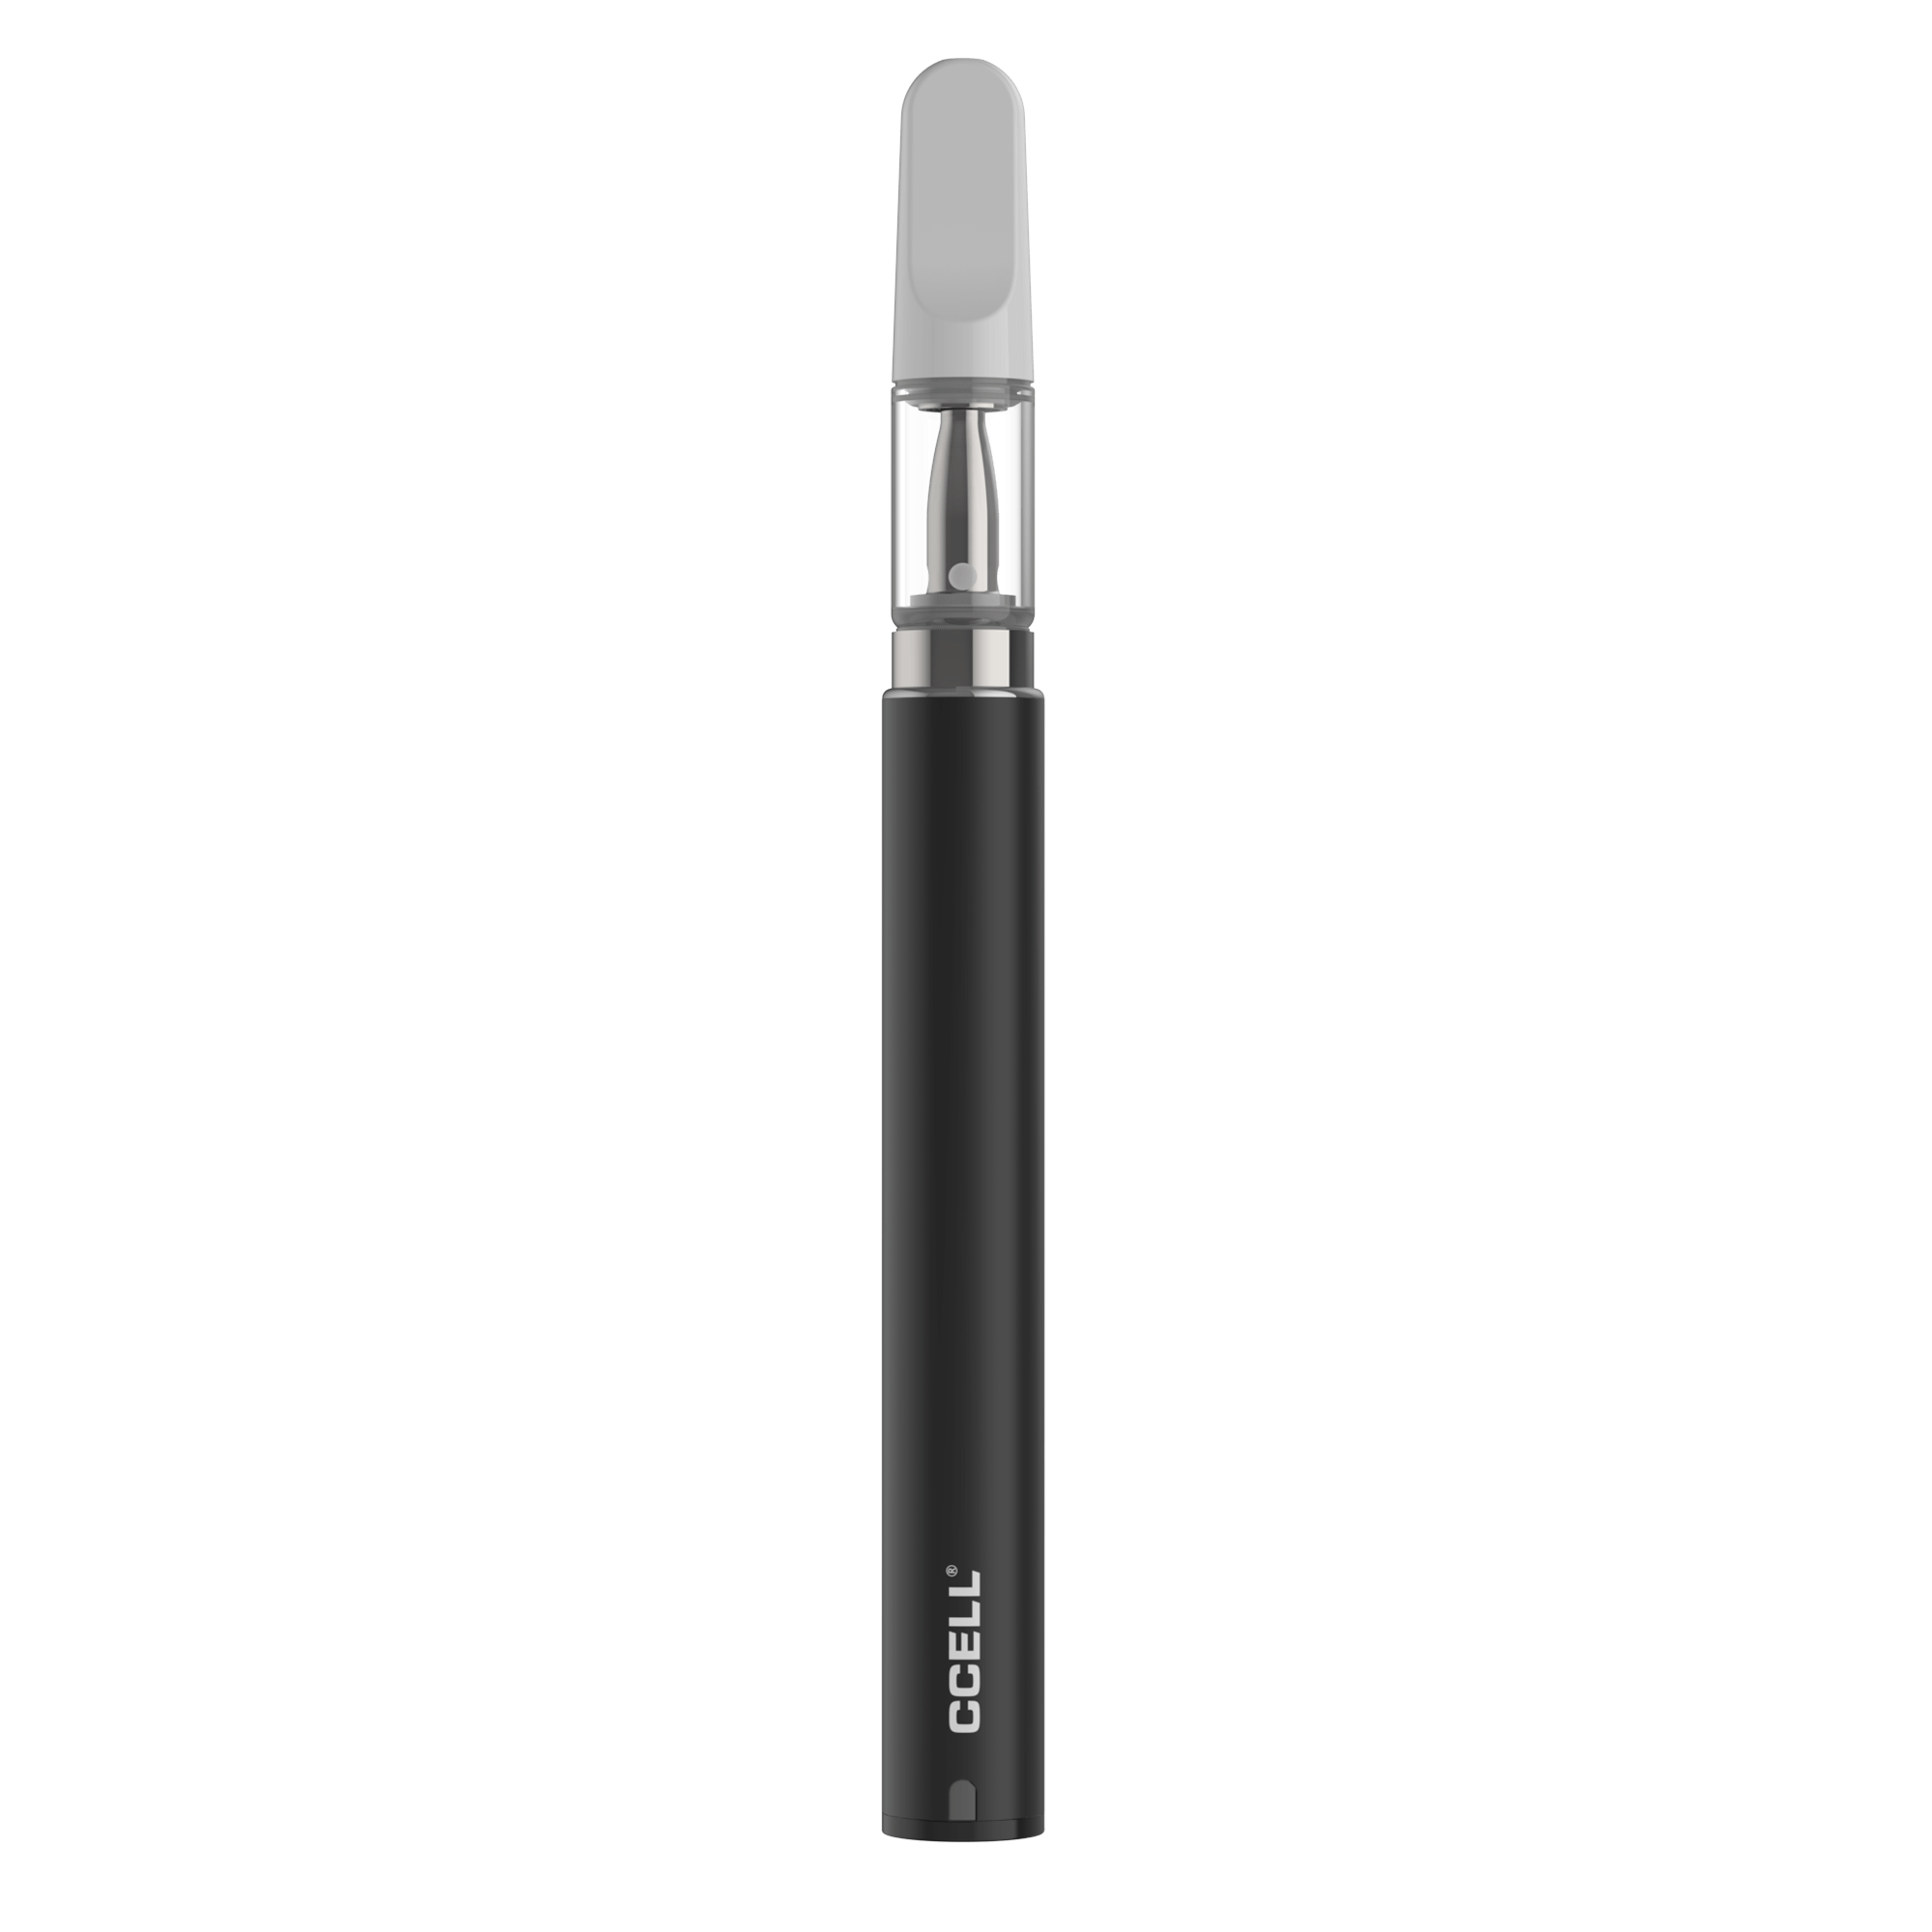 CCELL M3 Plus Vape Pen and Cartridge